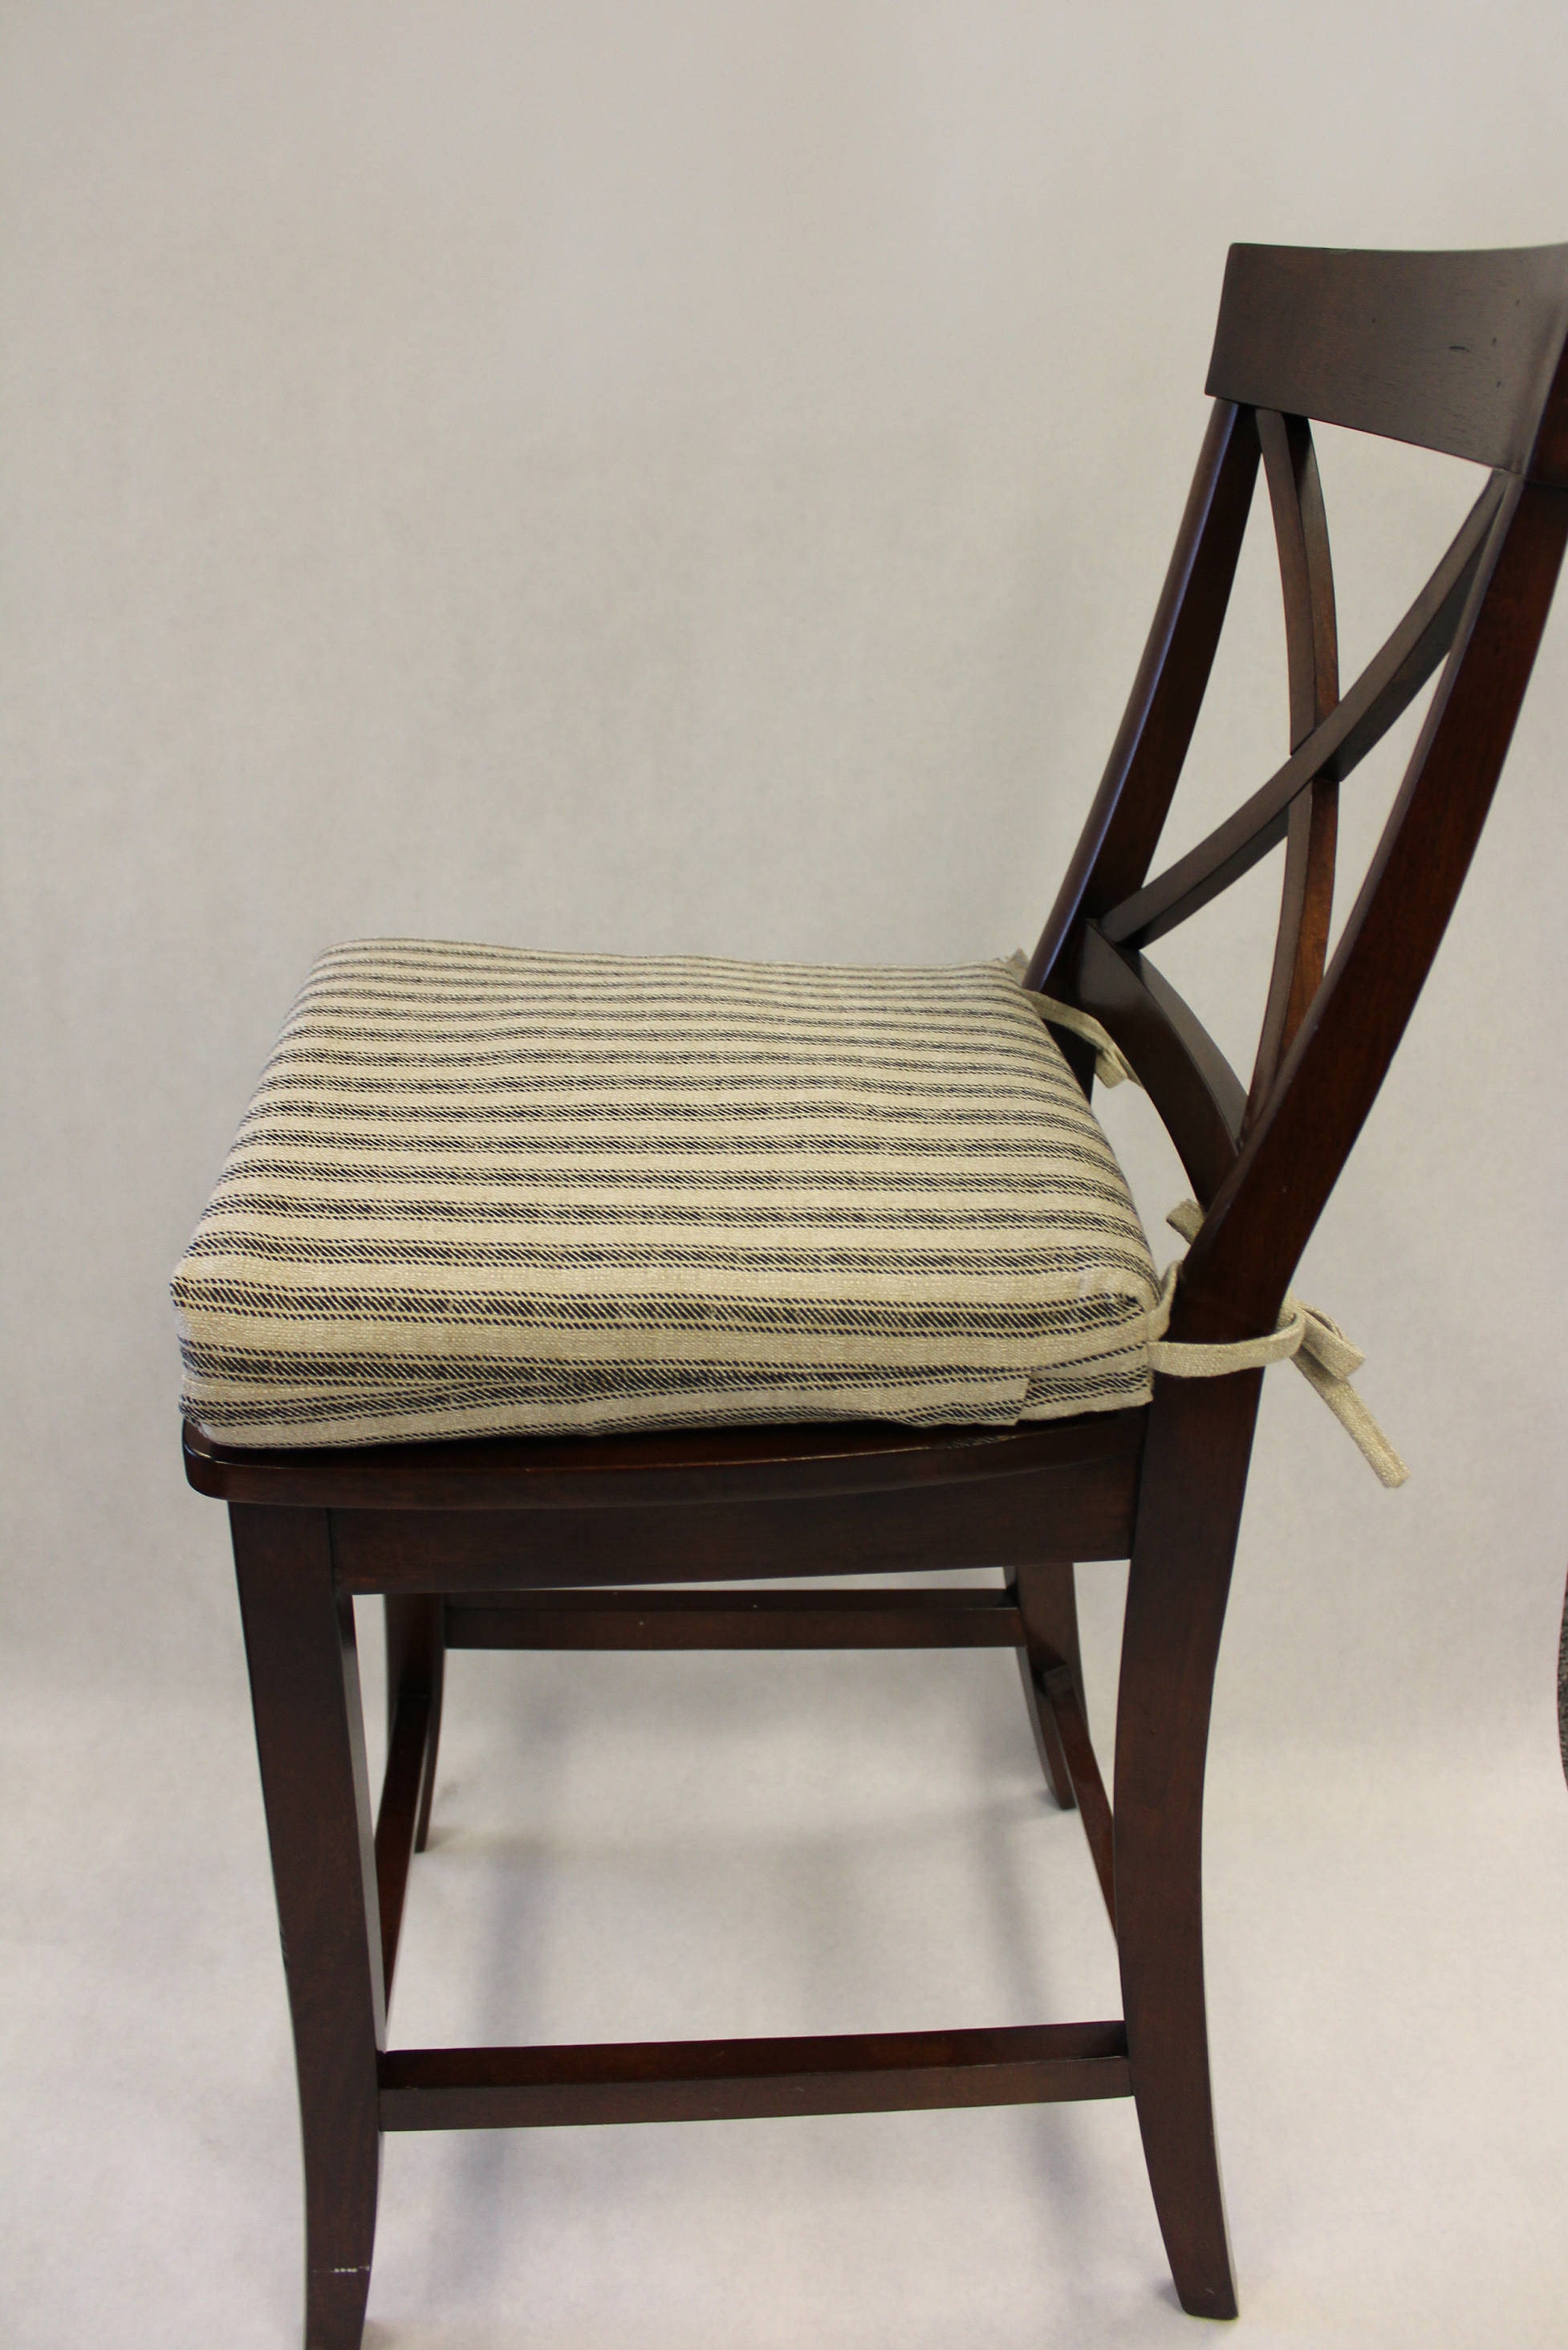 Black Ticking Stripe Chair Cushions, Rustic Stool Seat Cushion, Hayes  Denton Seat Pad, Replacement Cushion 18 Double Ties at Corner 